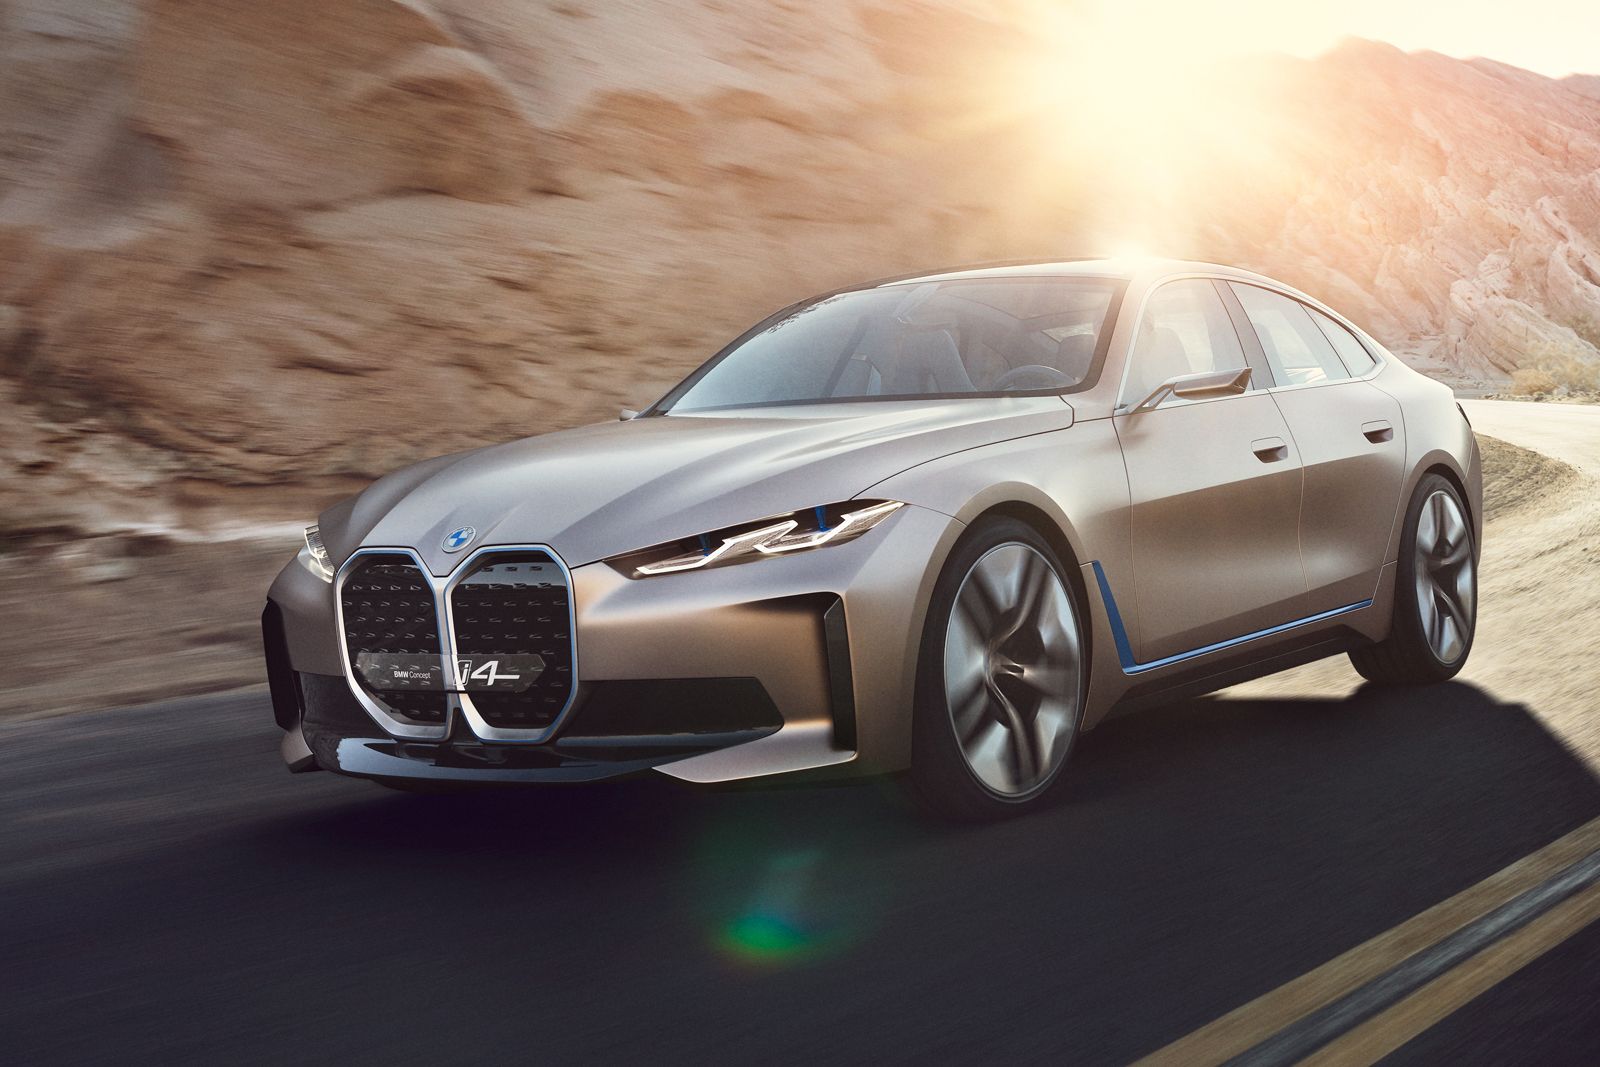 After a long wait BMW shows off the all-electric i4 saloon image 1